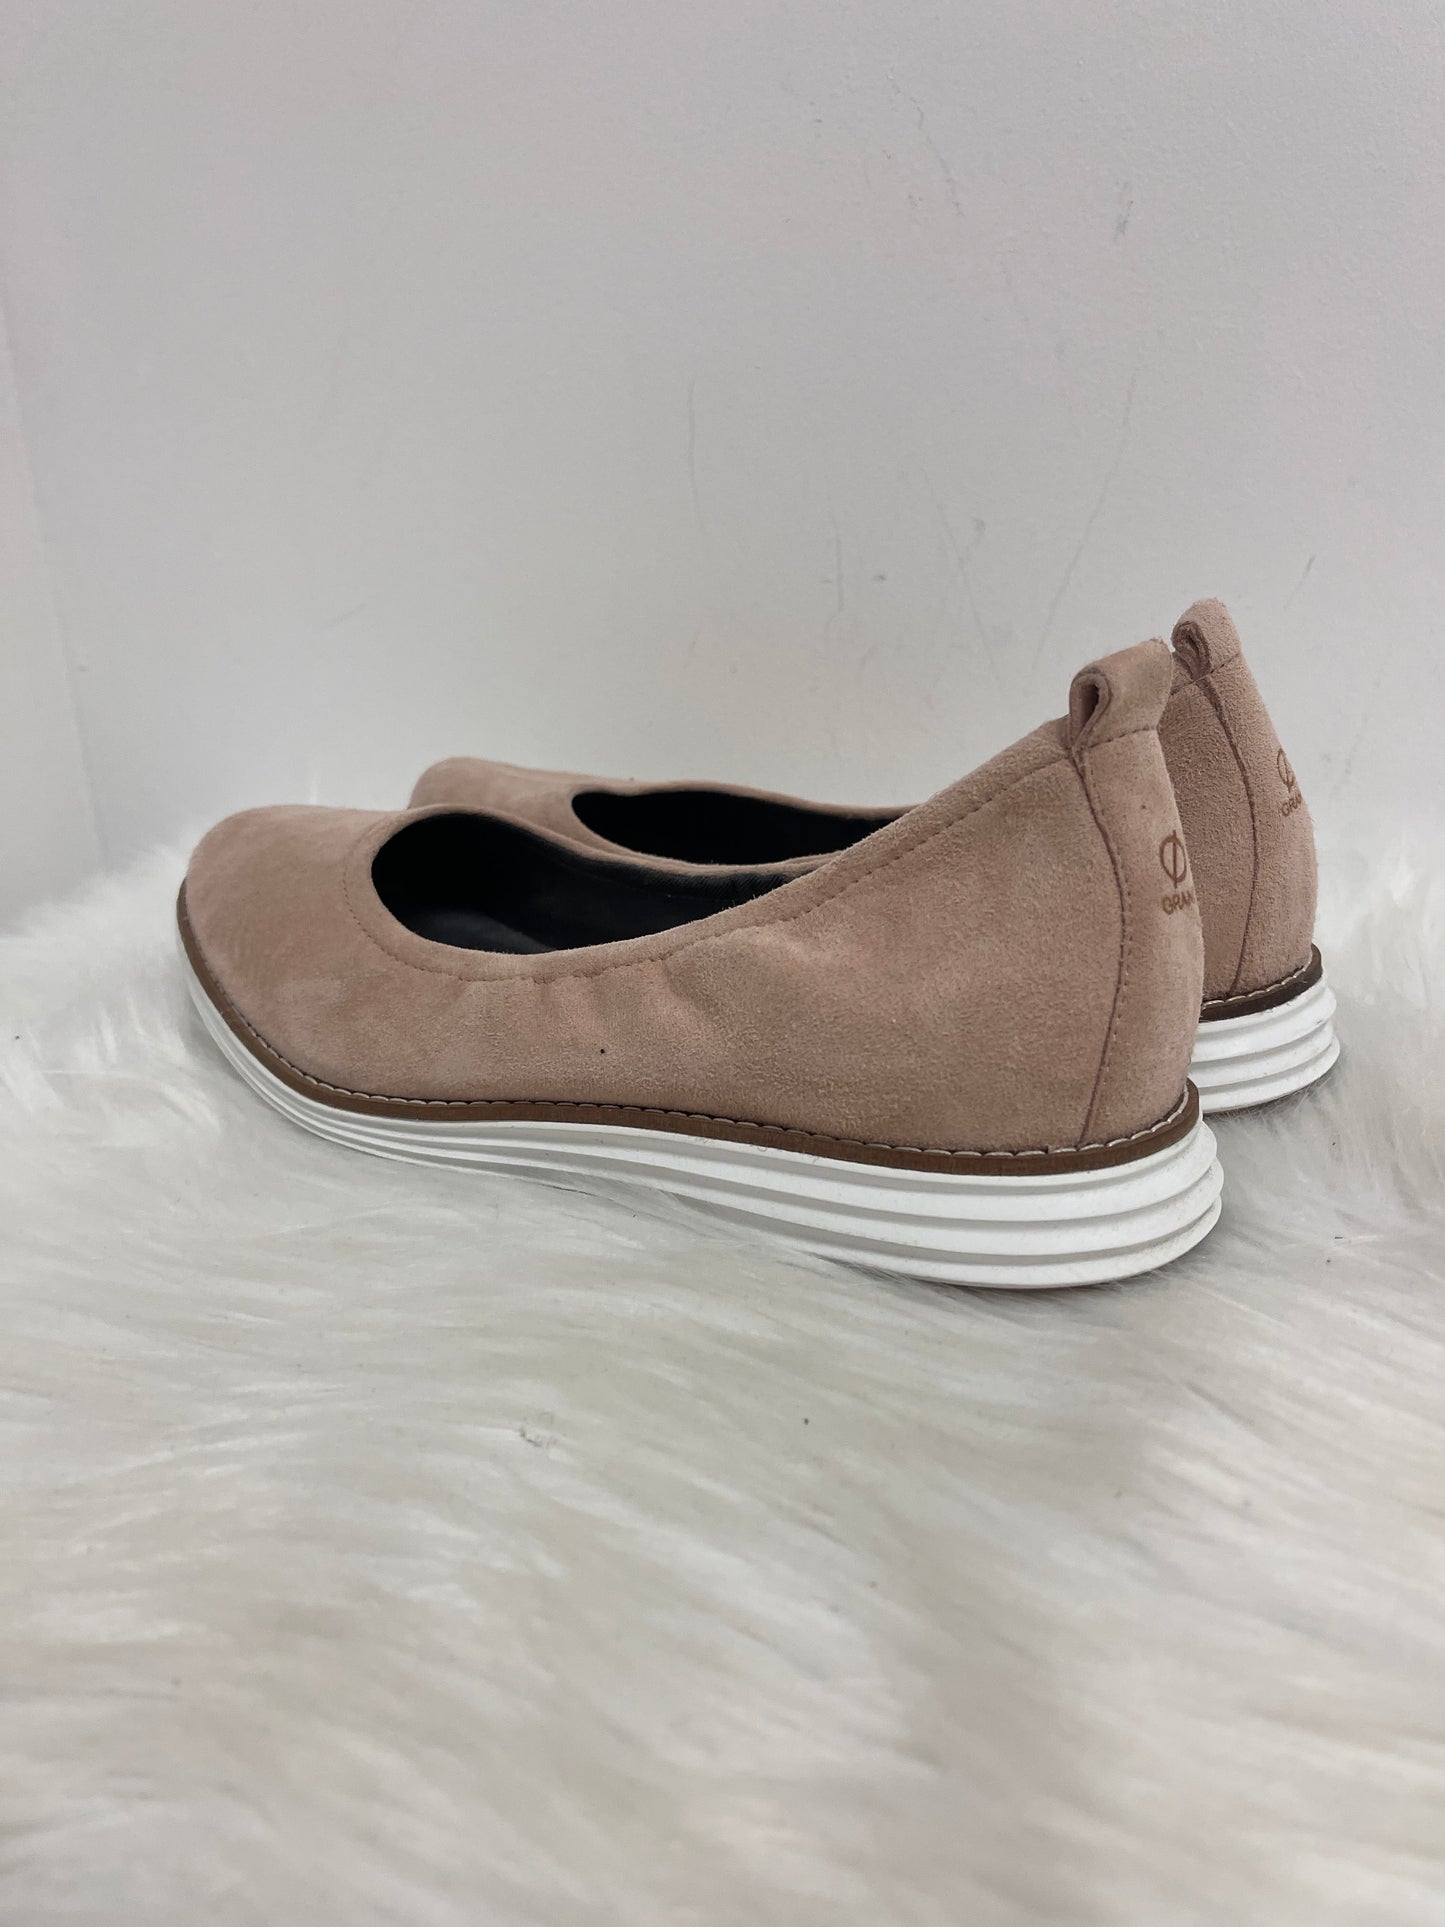 Shoes Flats By Cole-haan  Size: 8.5